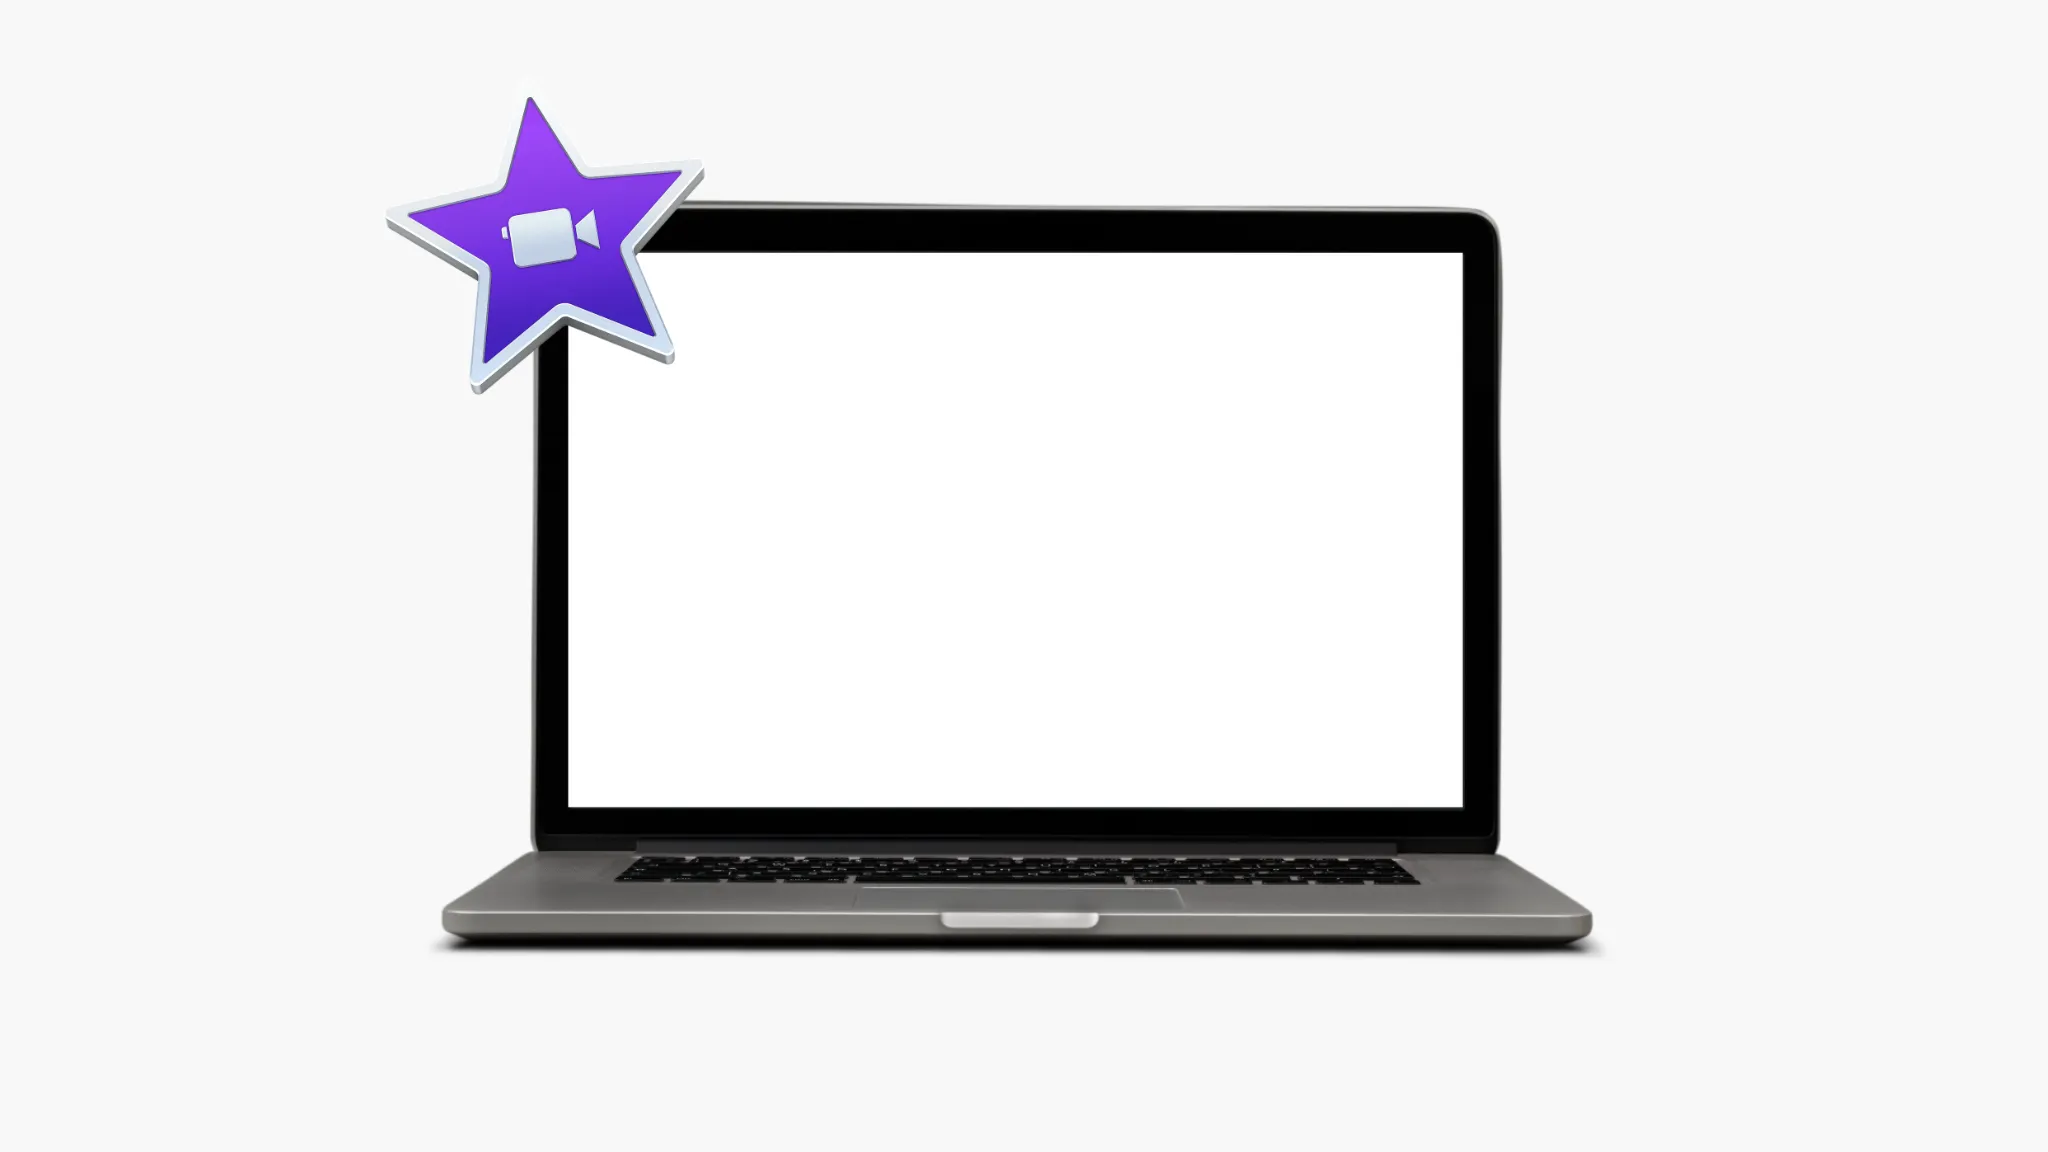 Launch iMovie on your Mac